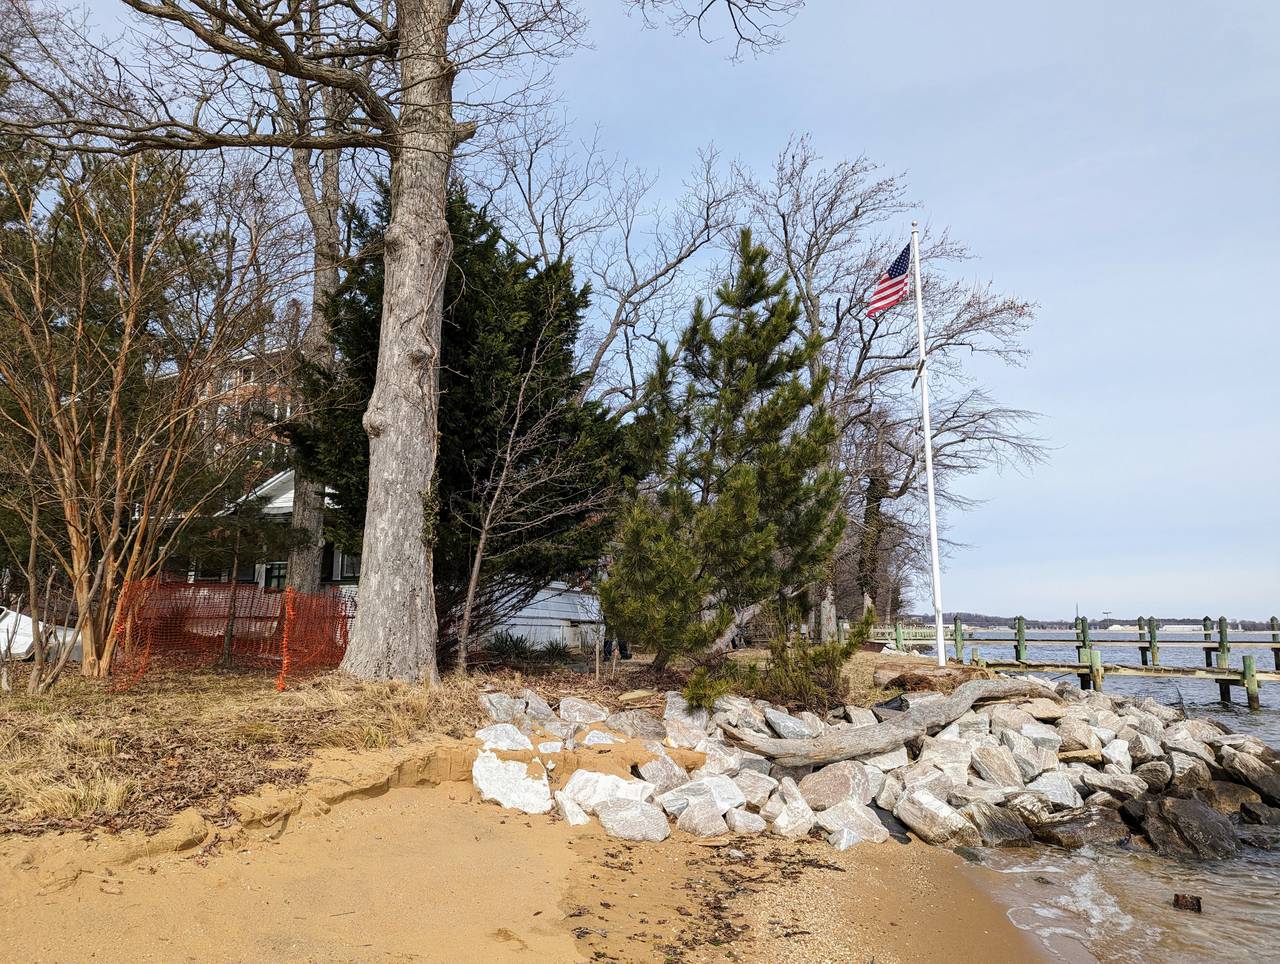 The Moore family cottage, which sits on about half an acre, has long been vacant. Although it has a view of the water over a long pier on the Chesapeake Bay, it is obscured by trees and overgrowth from Elktonia-Carr's Beach.